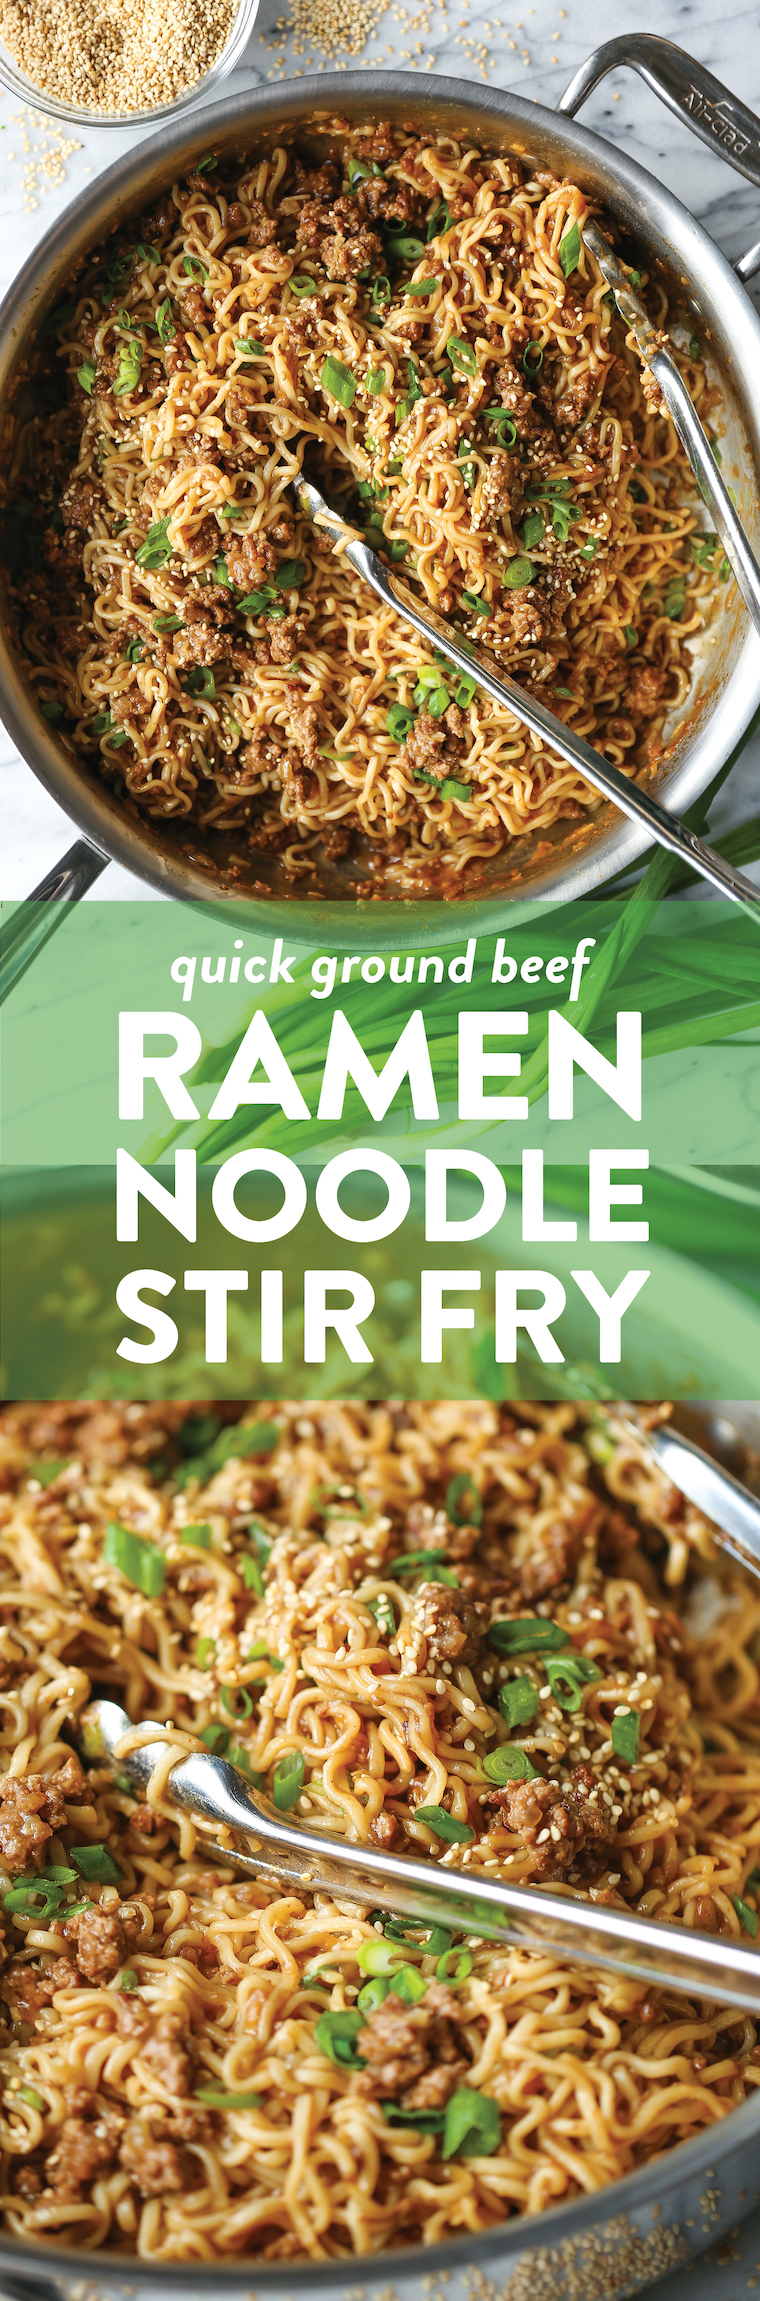 Quick Ramen Noodle Stir Fry - Fast, easy and budget-friendly using ramen noodles and ground beef for an amazing, saucy stir fry!